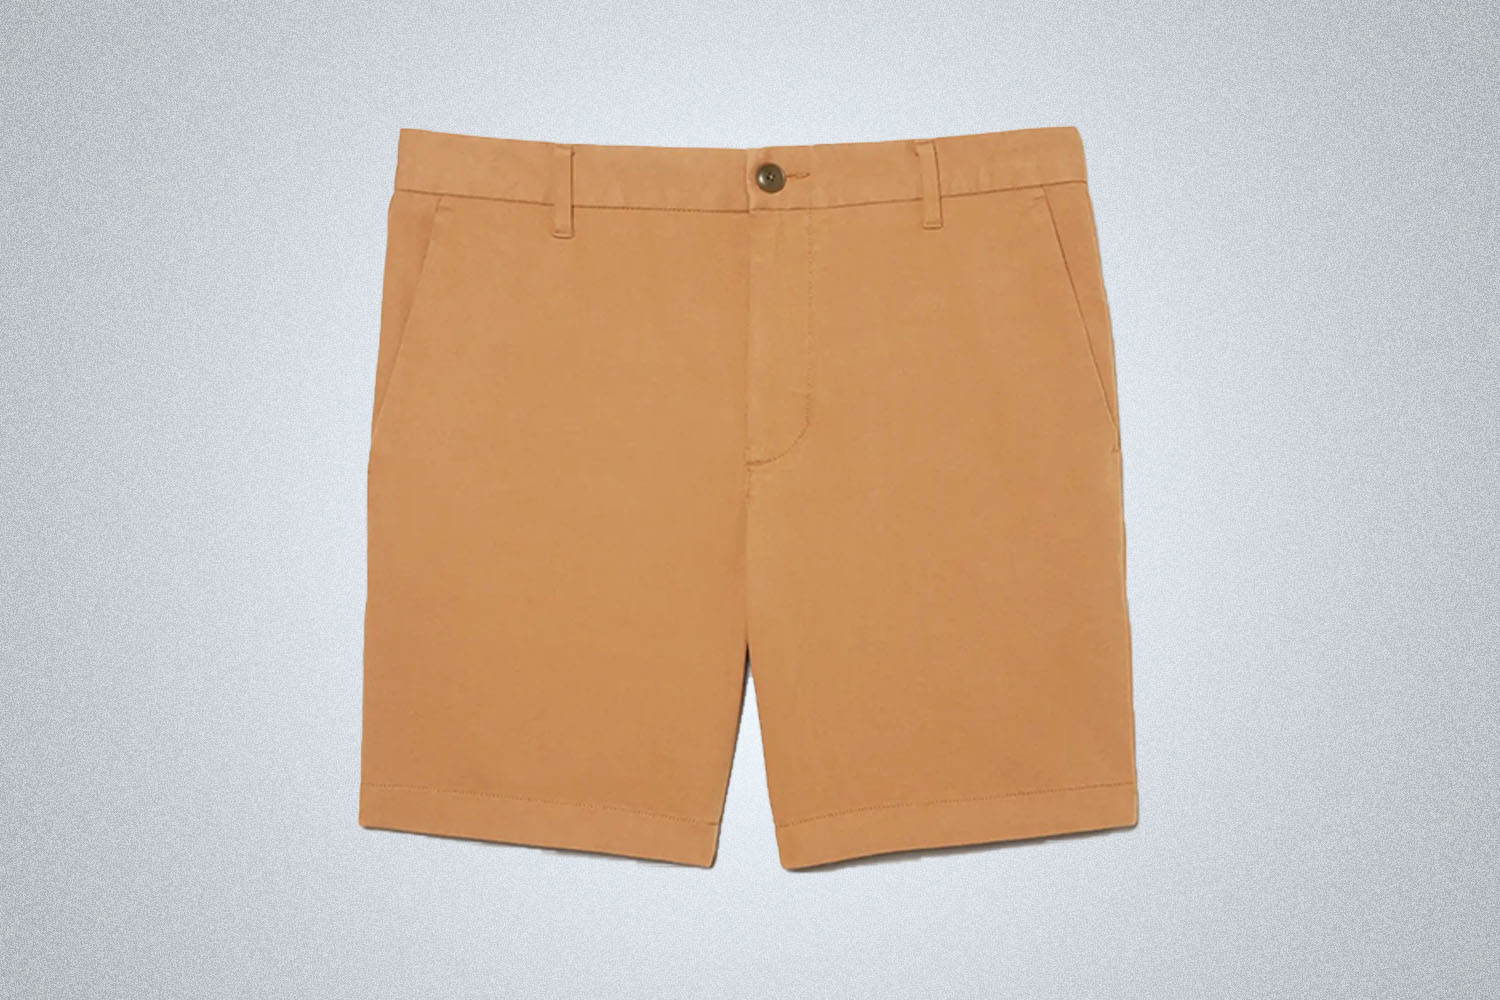 a pair of khaki 7" chino shorts from Everlane on a grey background